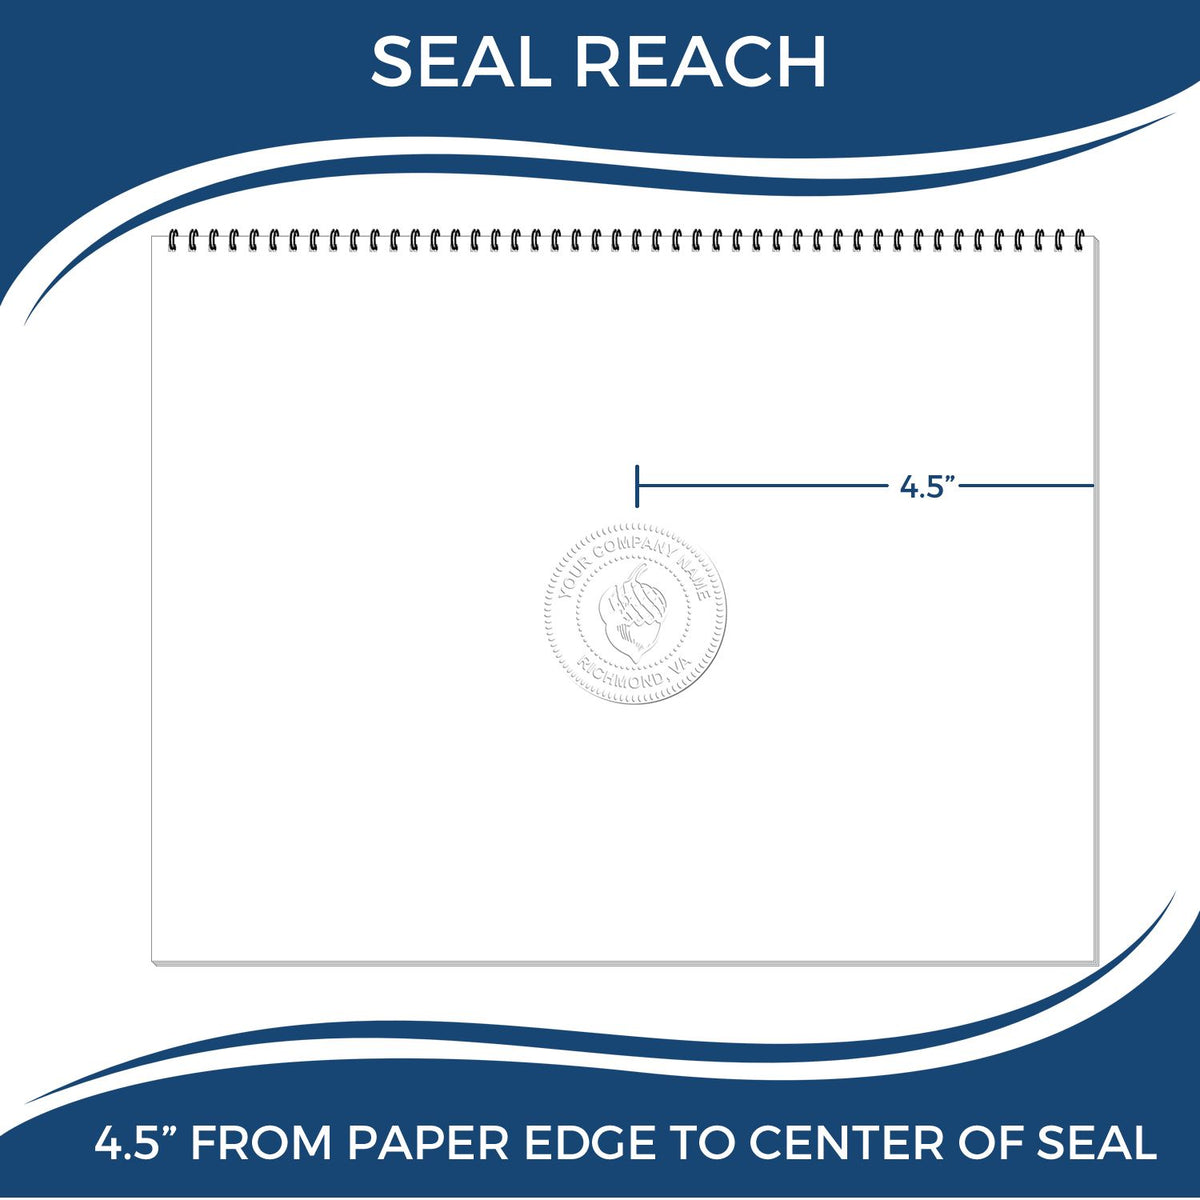 An infographic showing the seal reach which is represented by a ruler and a miniature seal image of the State of Delaware Extended Long Reach Engineer Seal